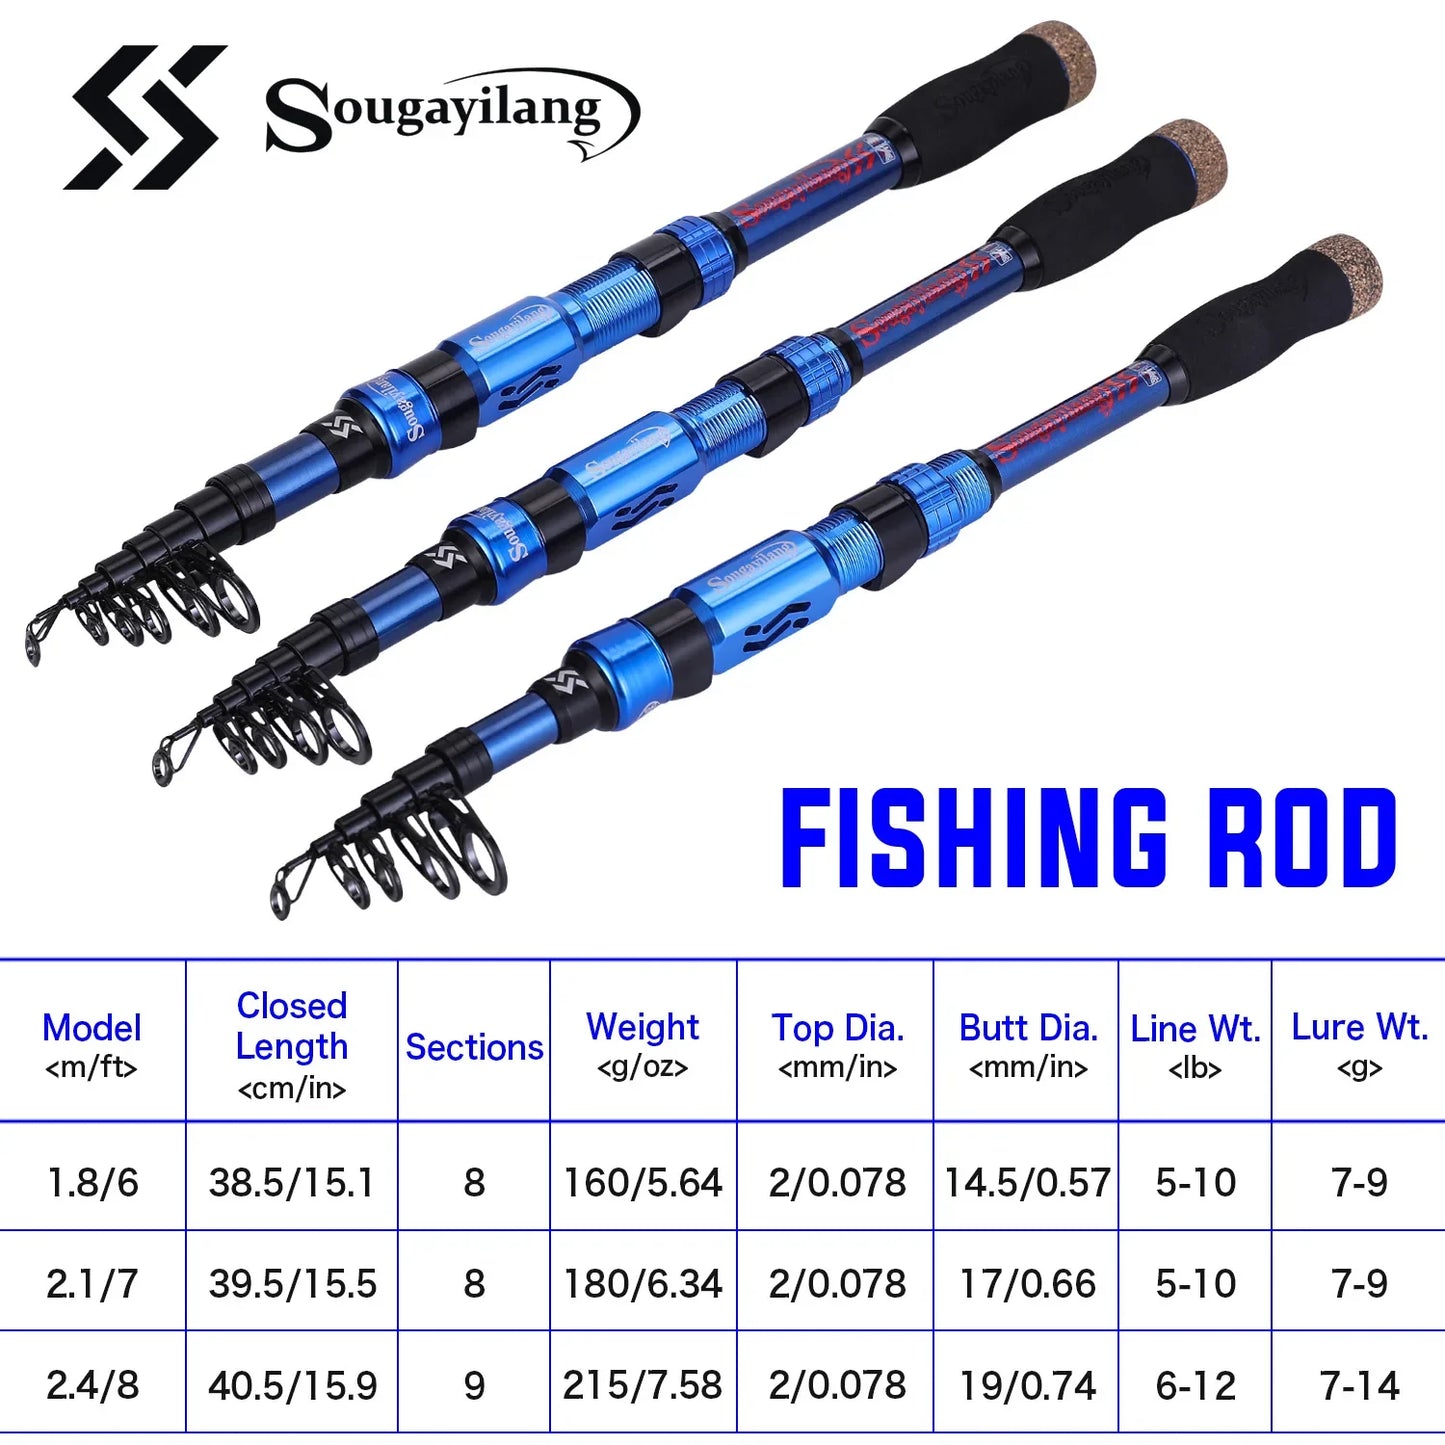 Sougayilang Portable 1.8-2.4m Telescopic Fishing Rods UltraLight Weight Carbon Fiber Fishing Pole for Saltwater Freshwater